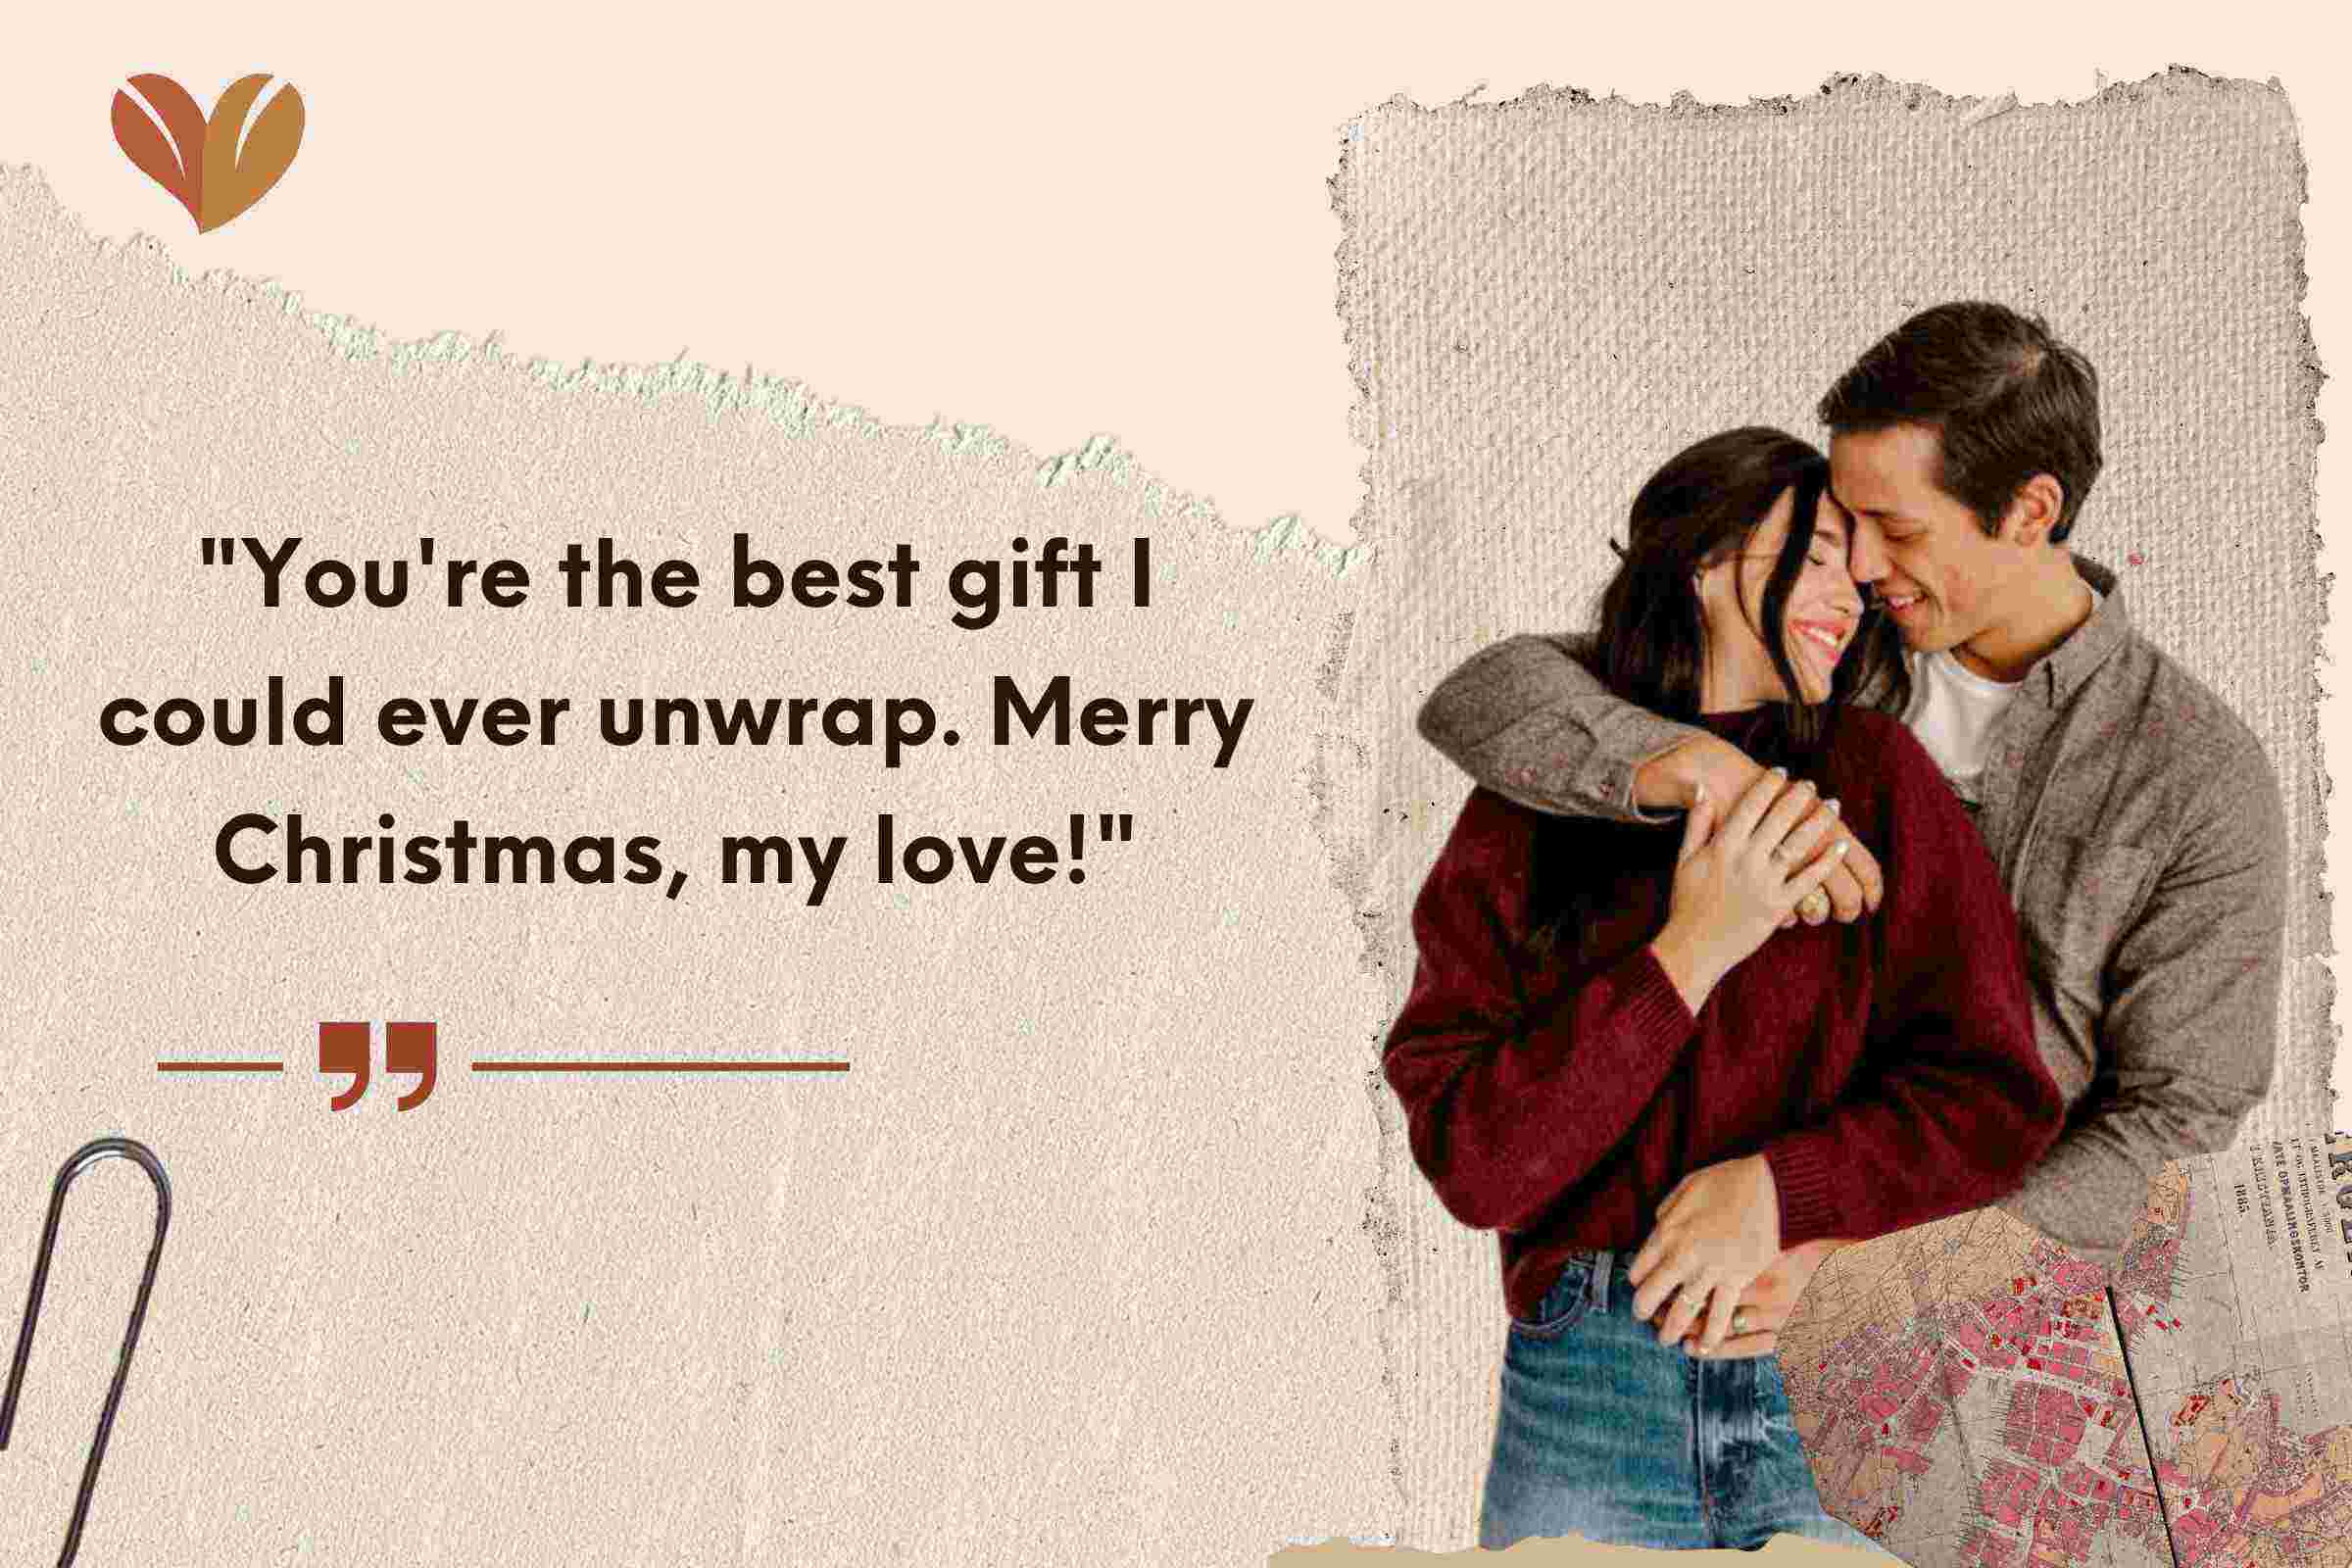 You're the best gift I could ever unwrap. Merry Christmas, my love!